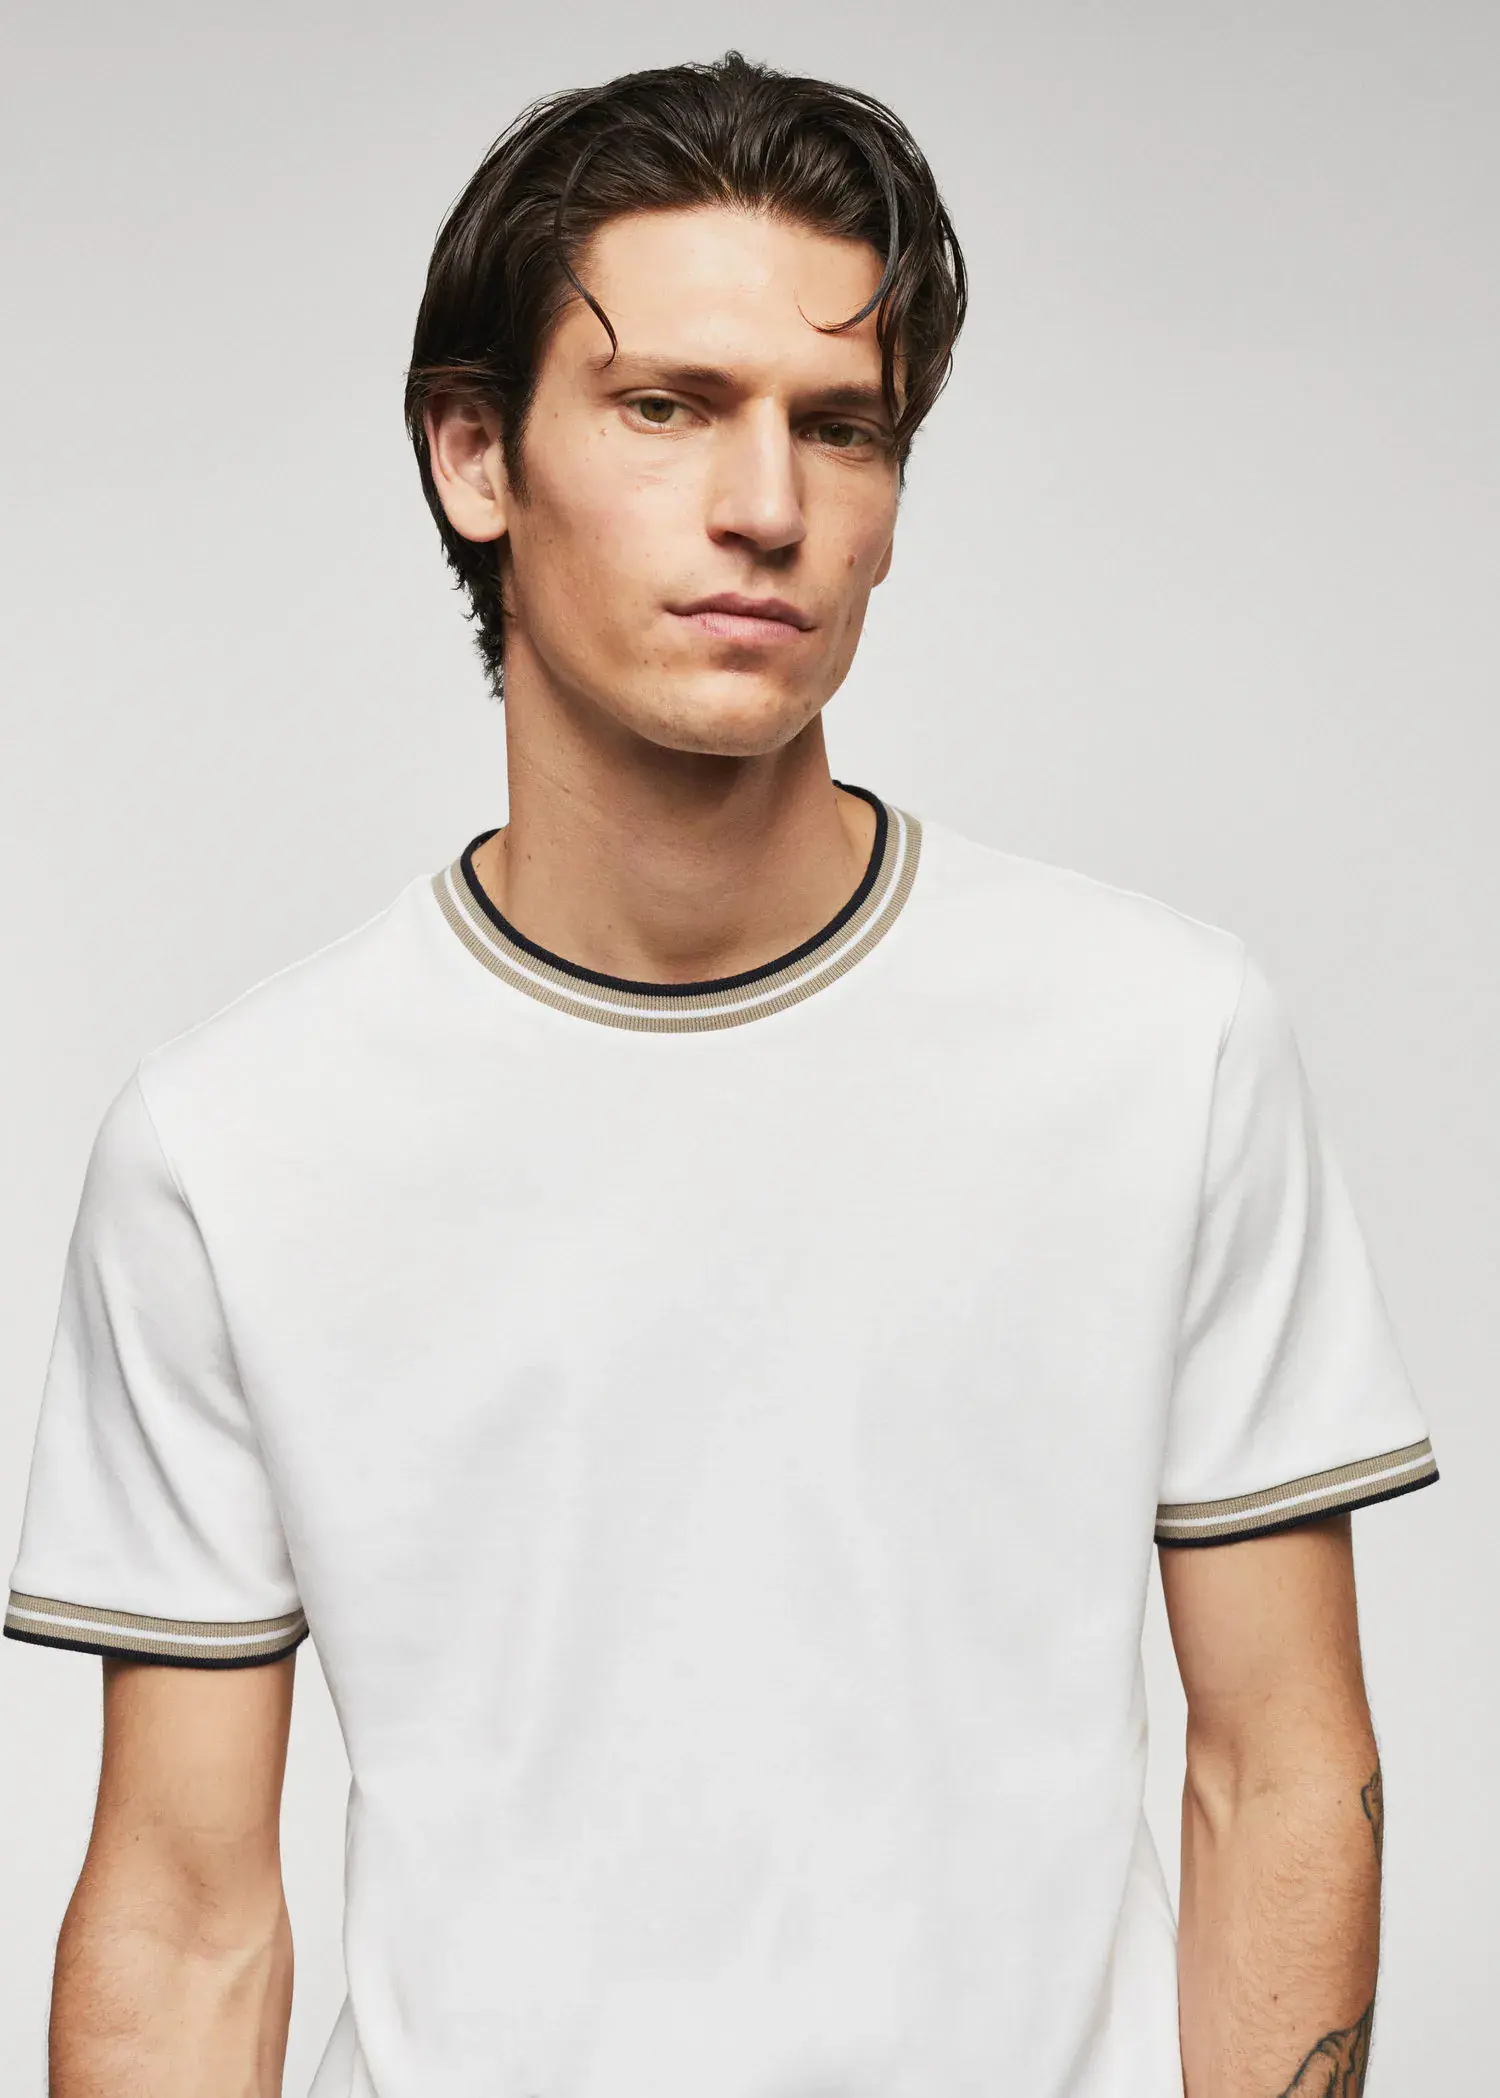 Mango 100% cotton t-shirt with contrast piping. a young man wearing a white t-shirt with a black and yellow trim around his neck. 